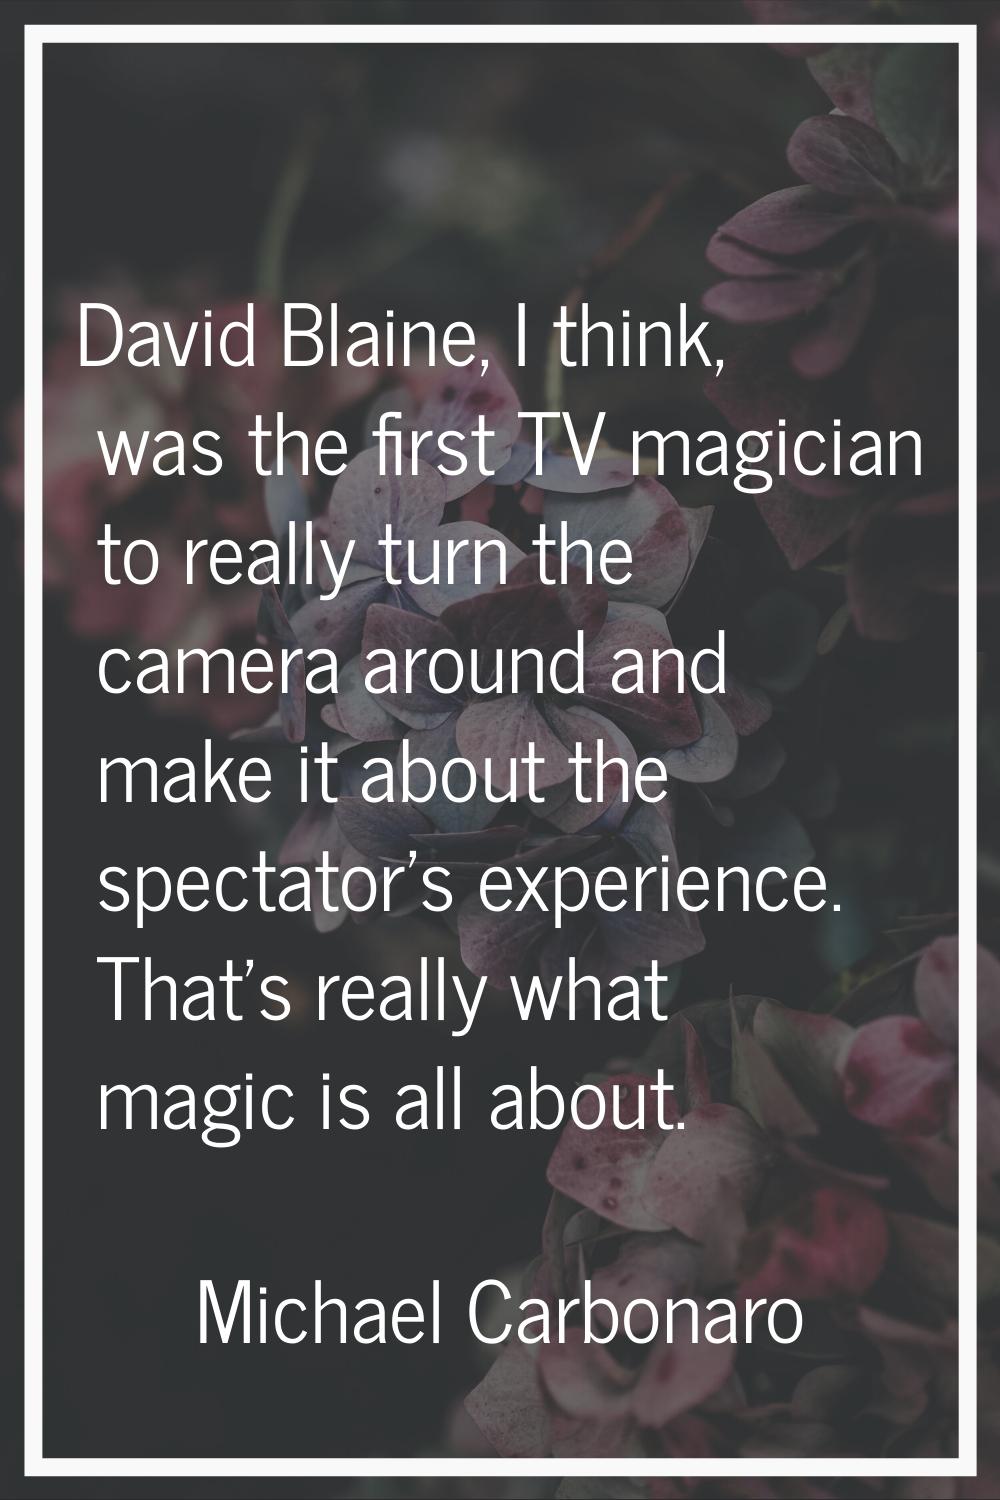 David Blaine, I think, was the first TV magician to really turn the camera around and make it about